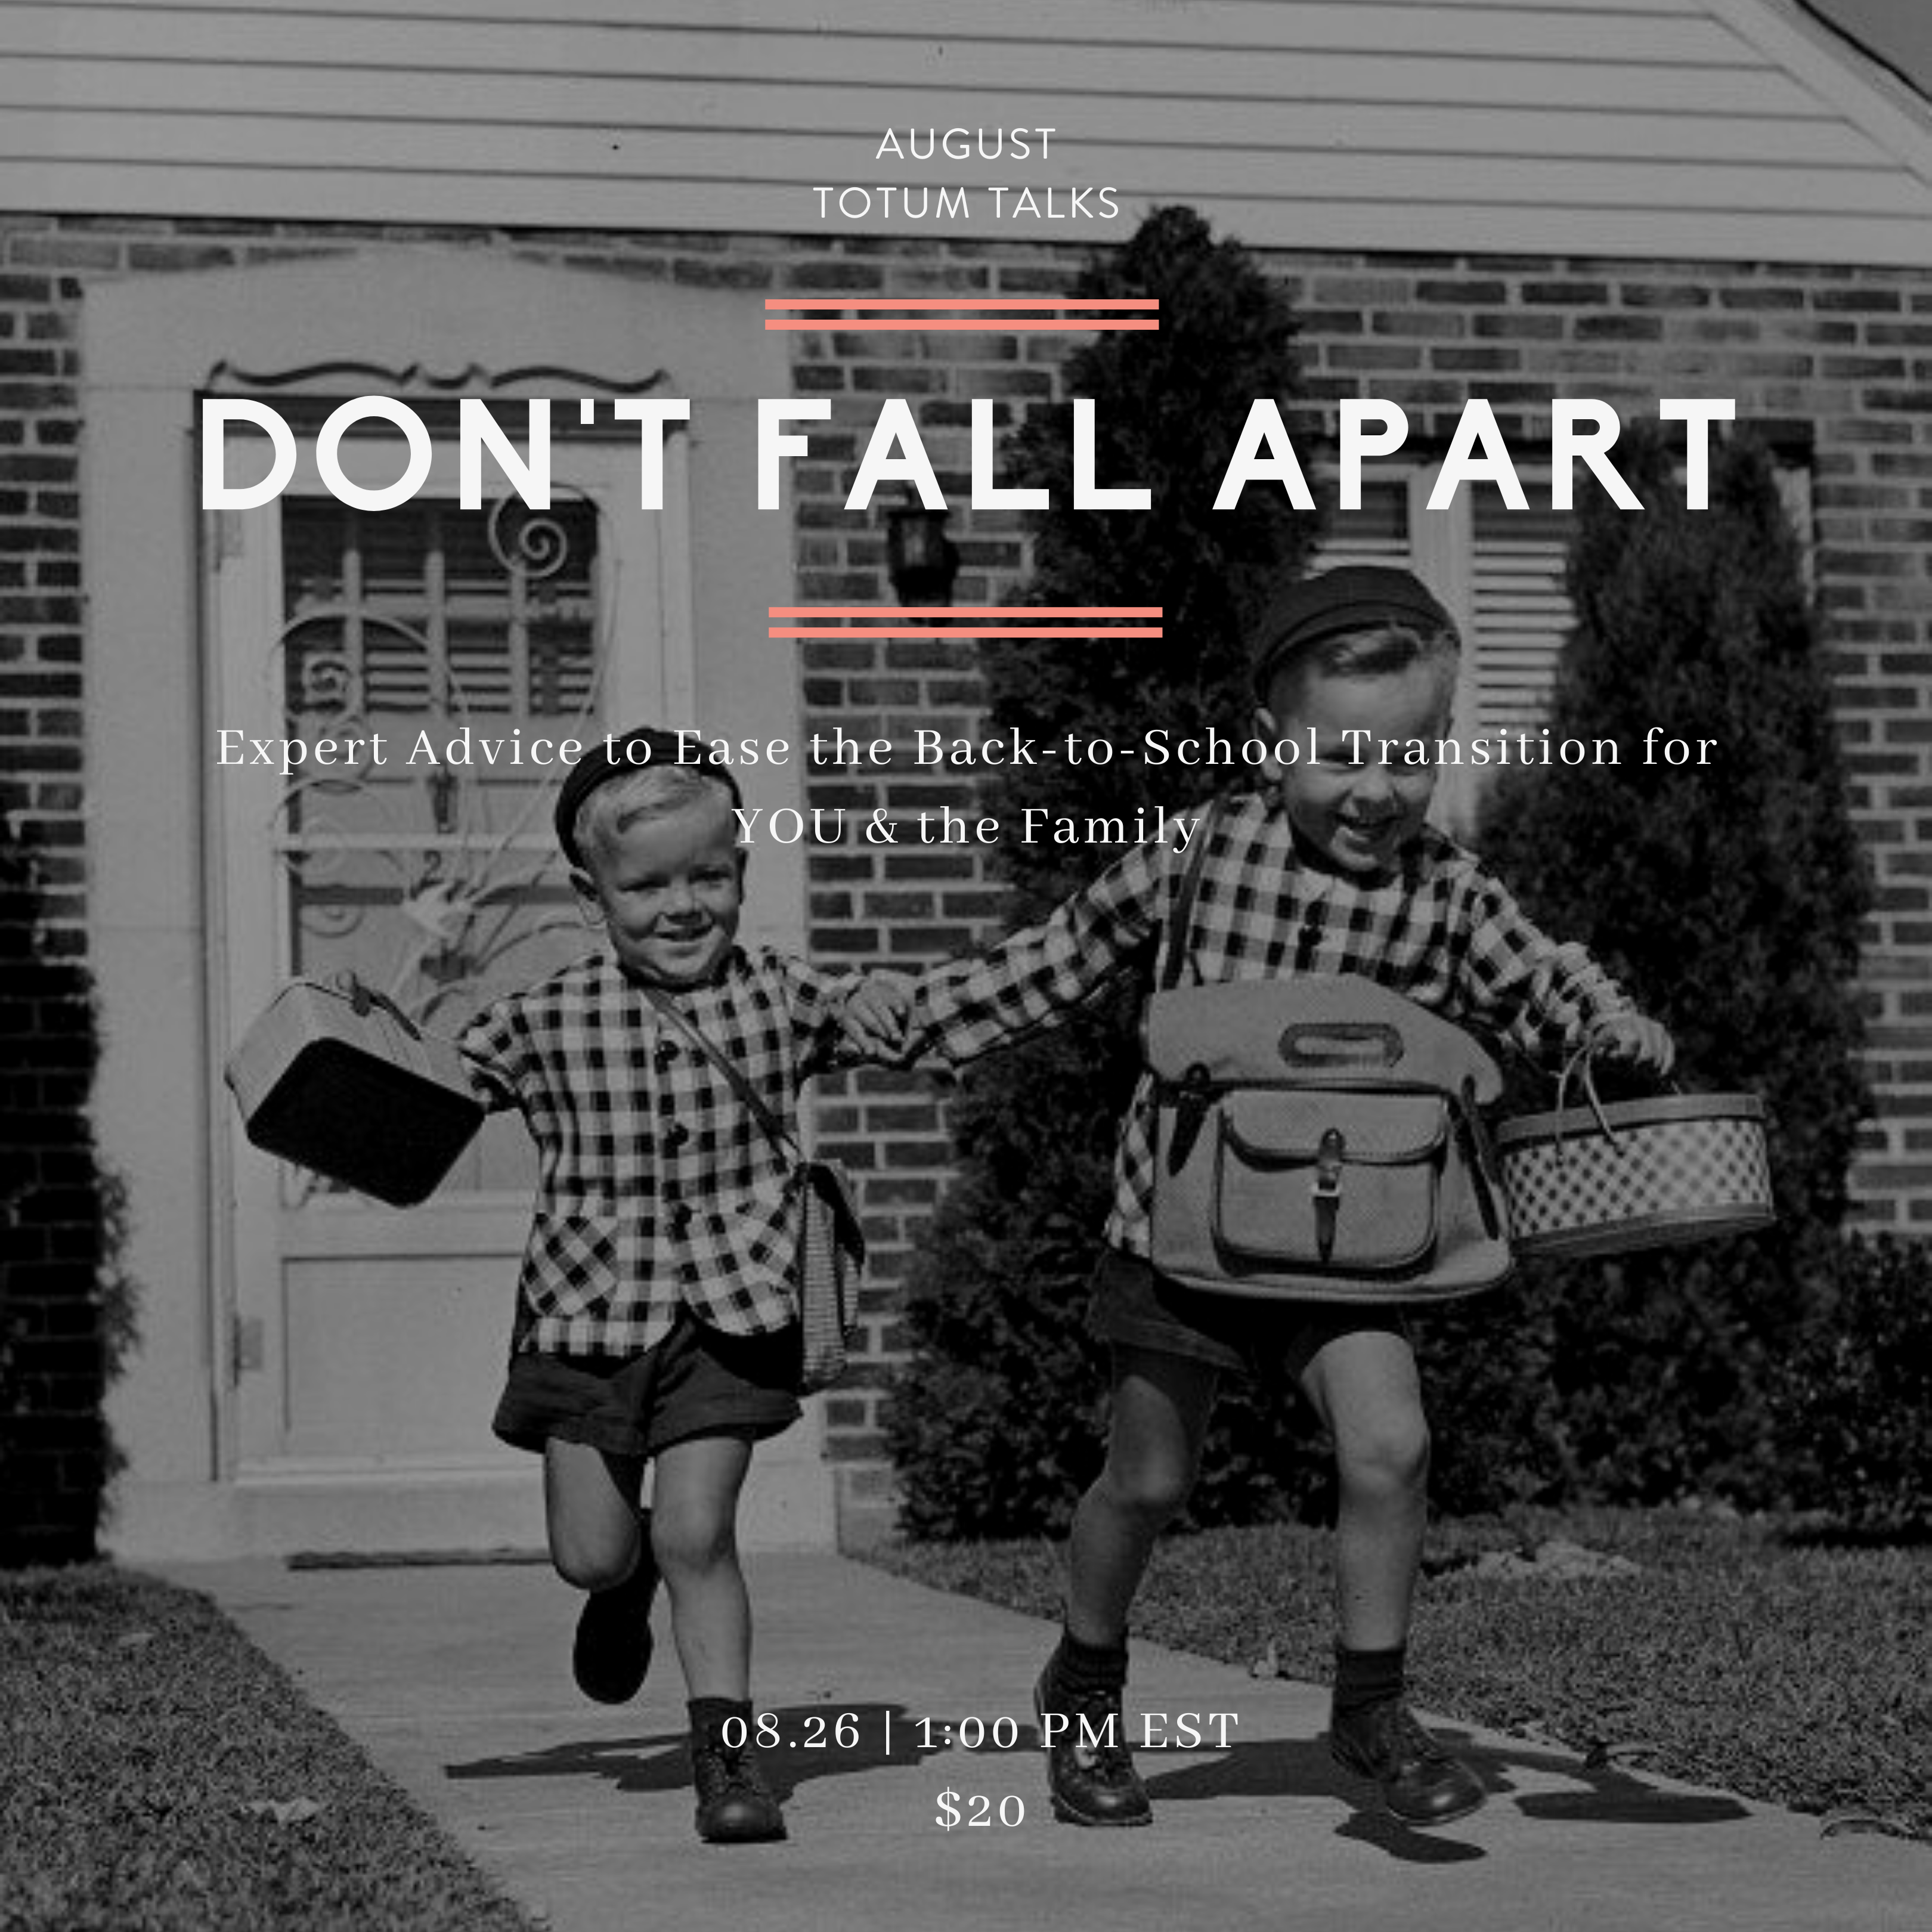 Don't Fall Apart - Expert Advice to Ease the Back-to-School Transition: On Demand